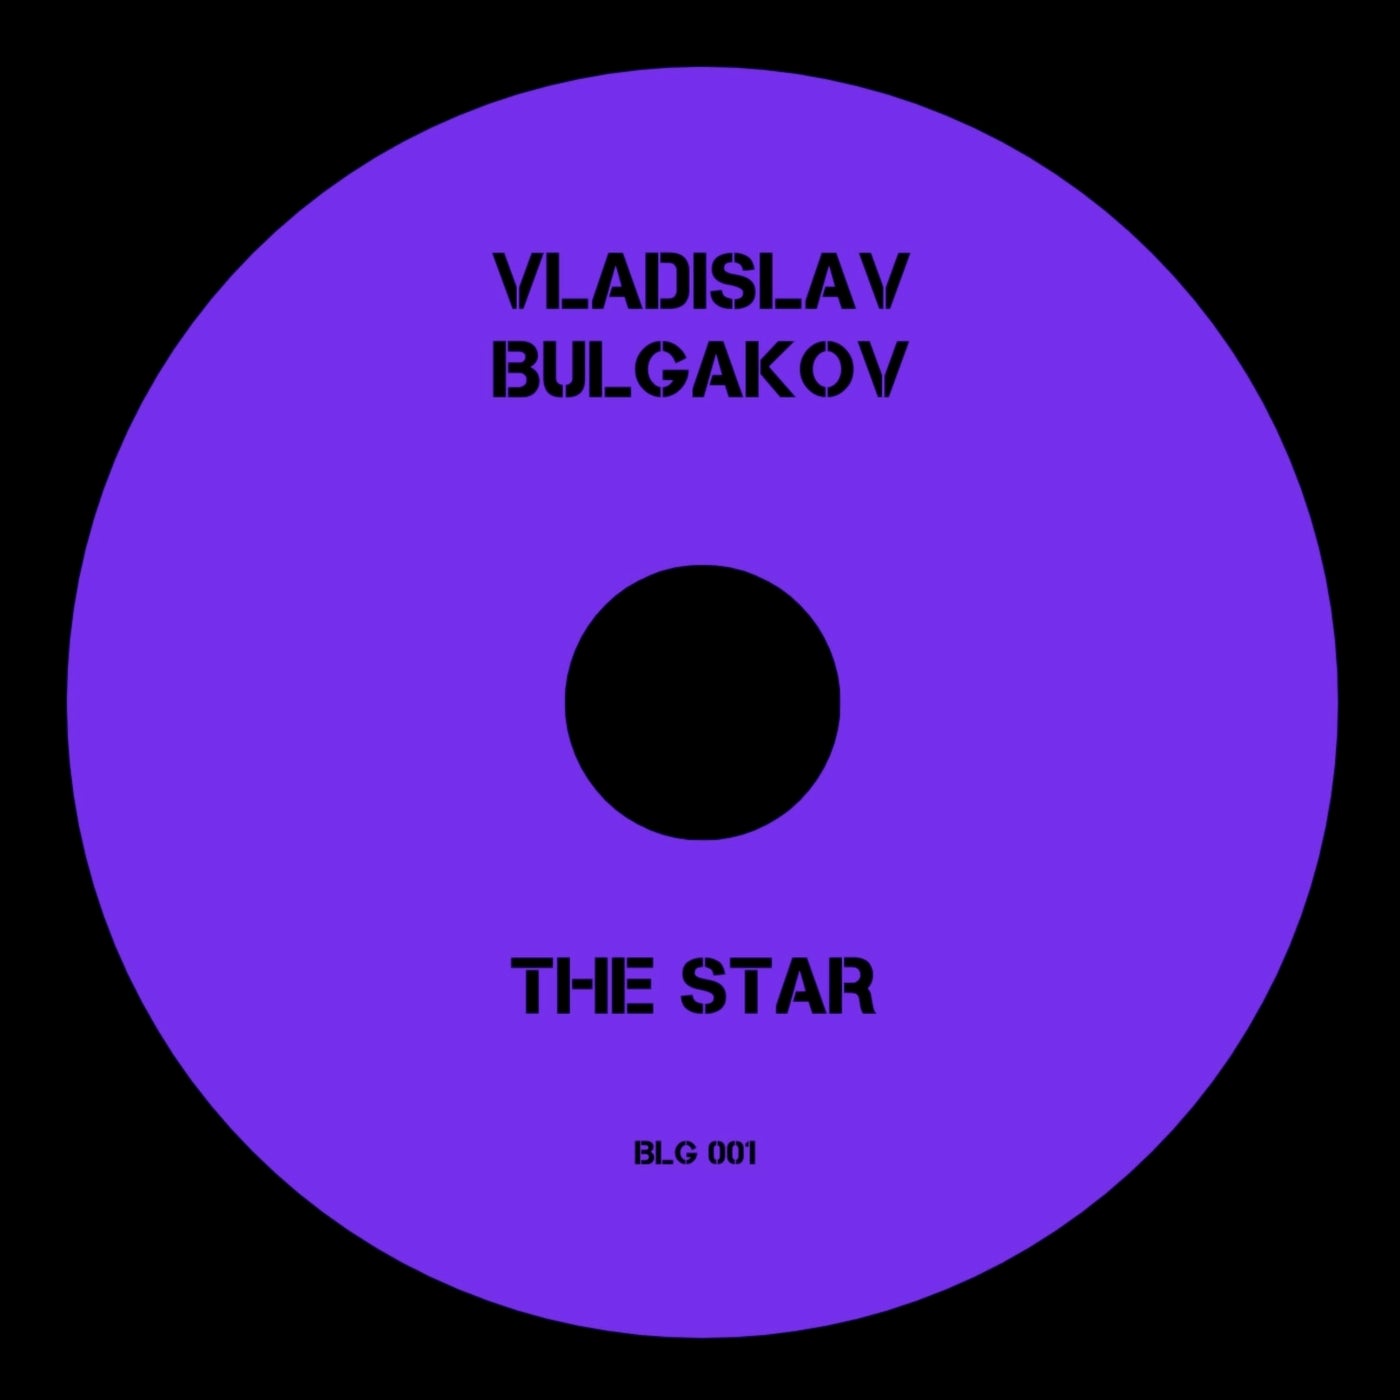 The Star (Extended Mix)